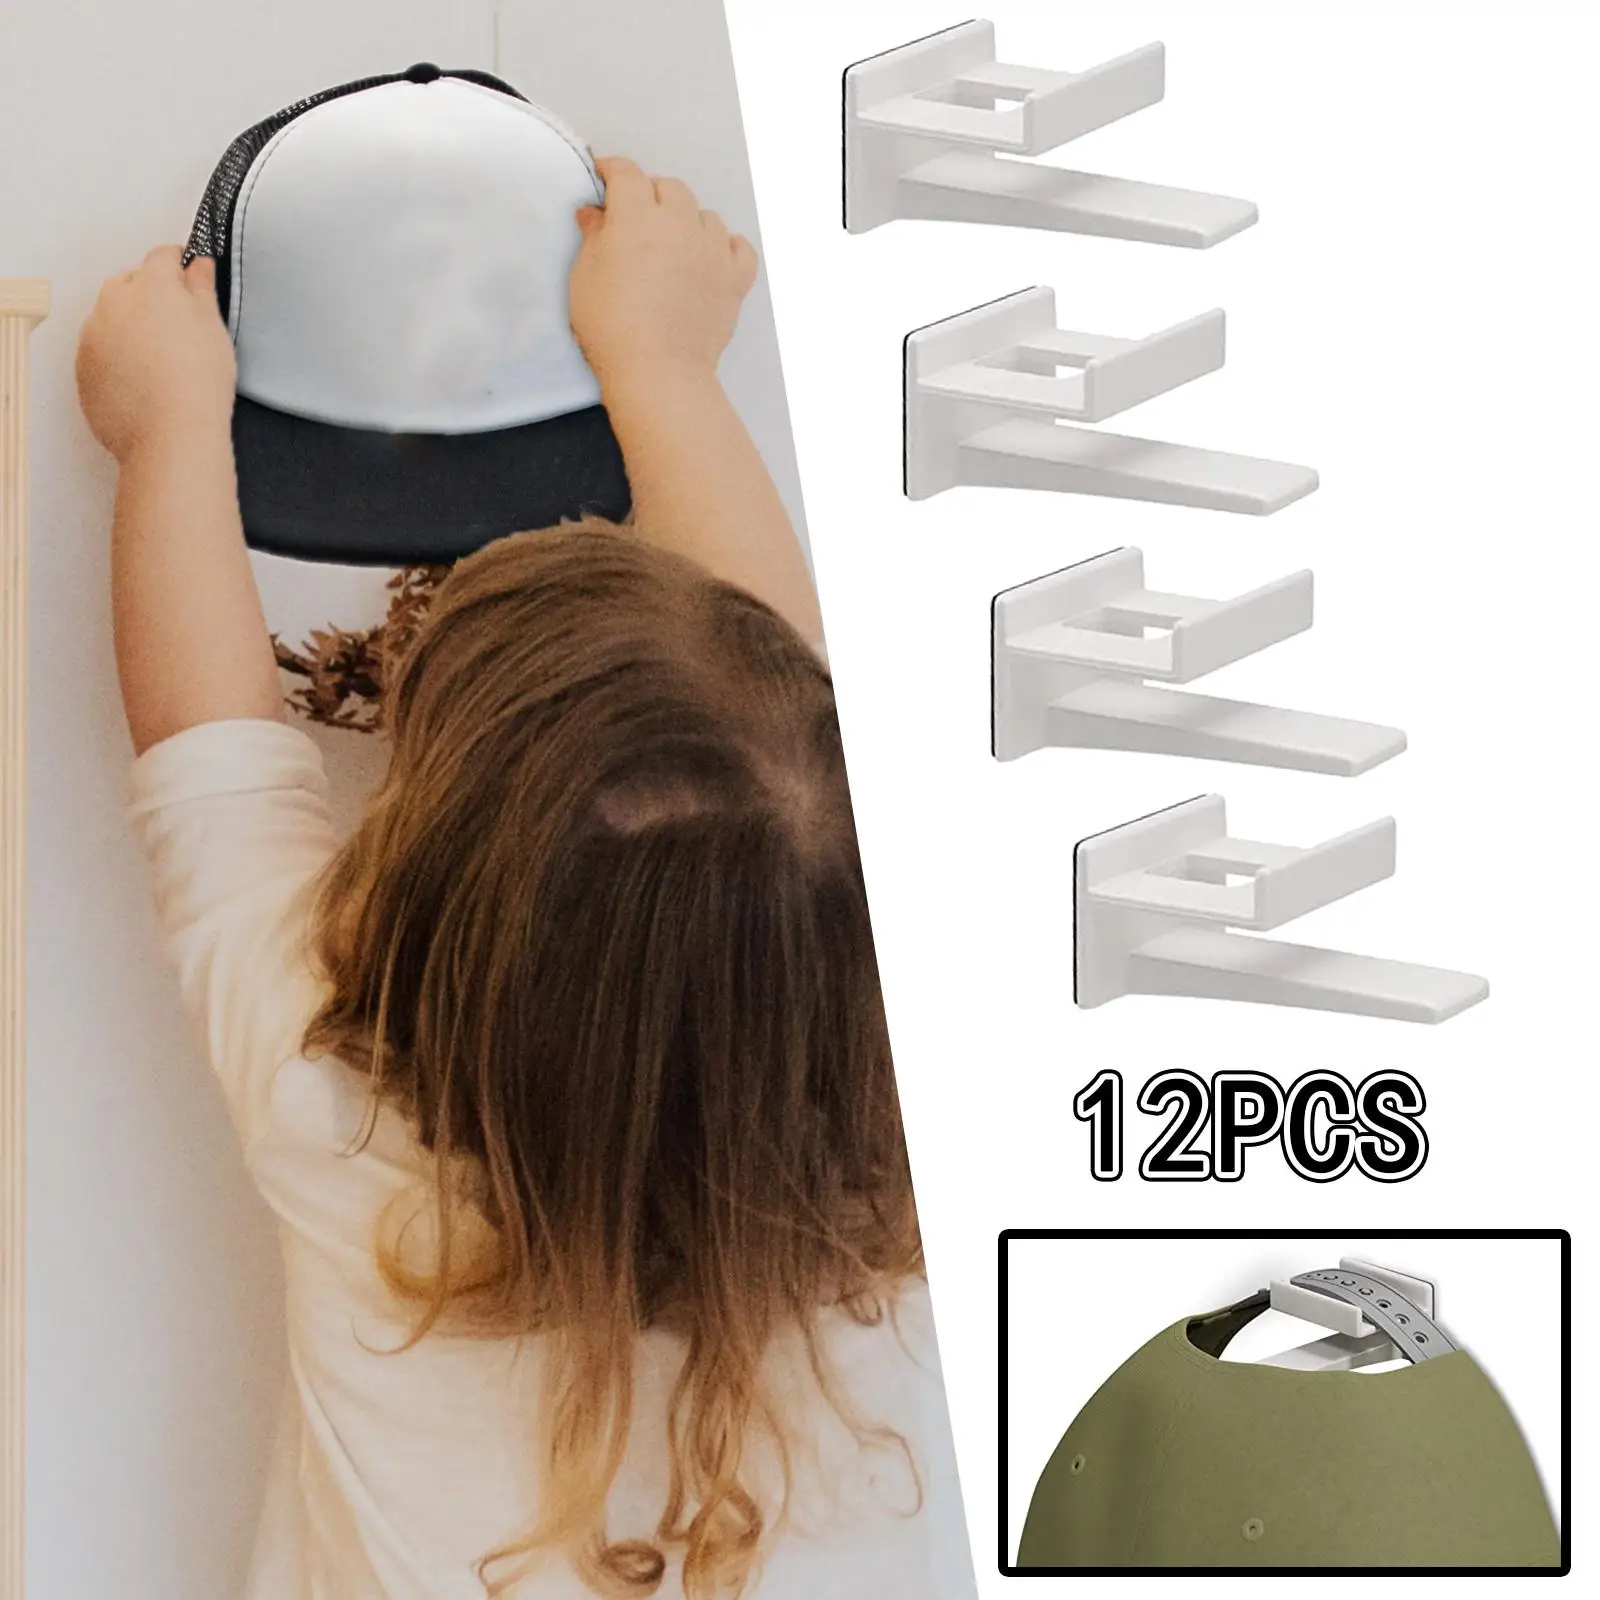 12 Pieces Baseball Caps Hangers Hat Hooks for Wall Mounted Wall Mount Hat Organizer for Office